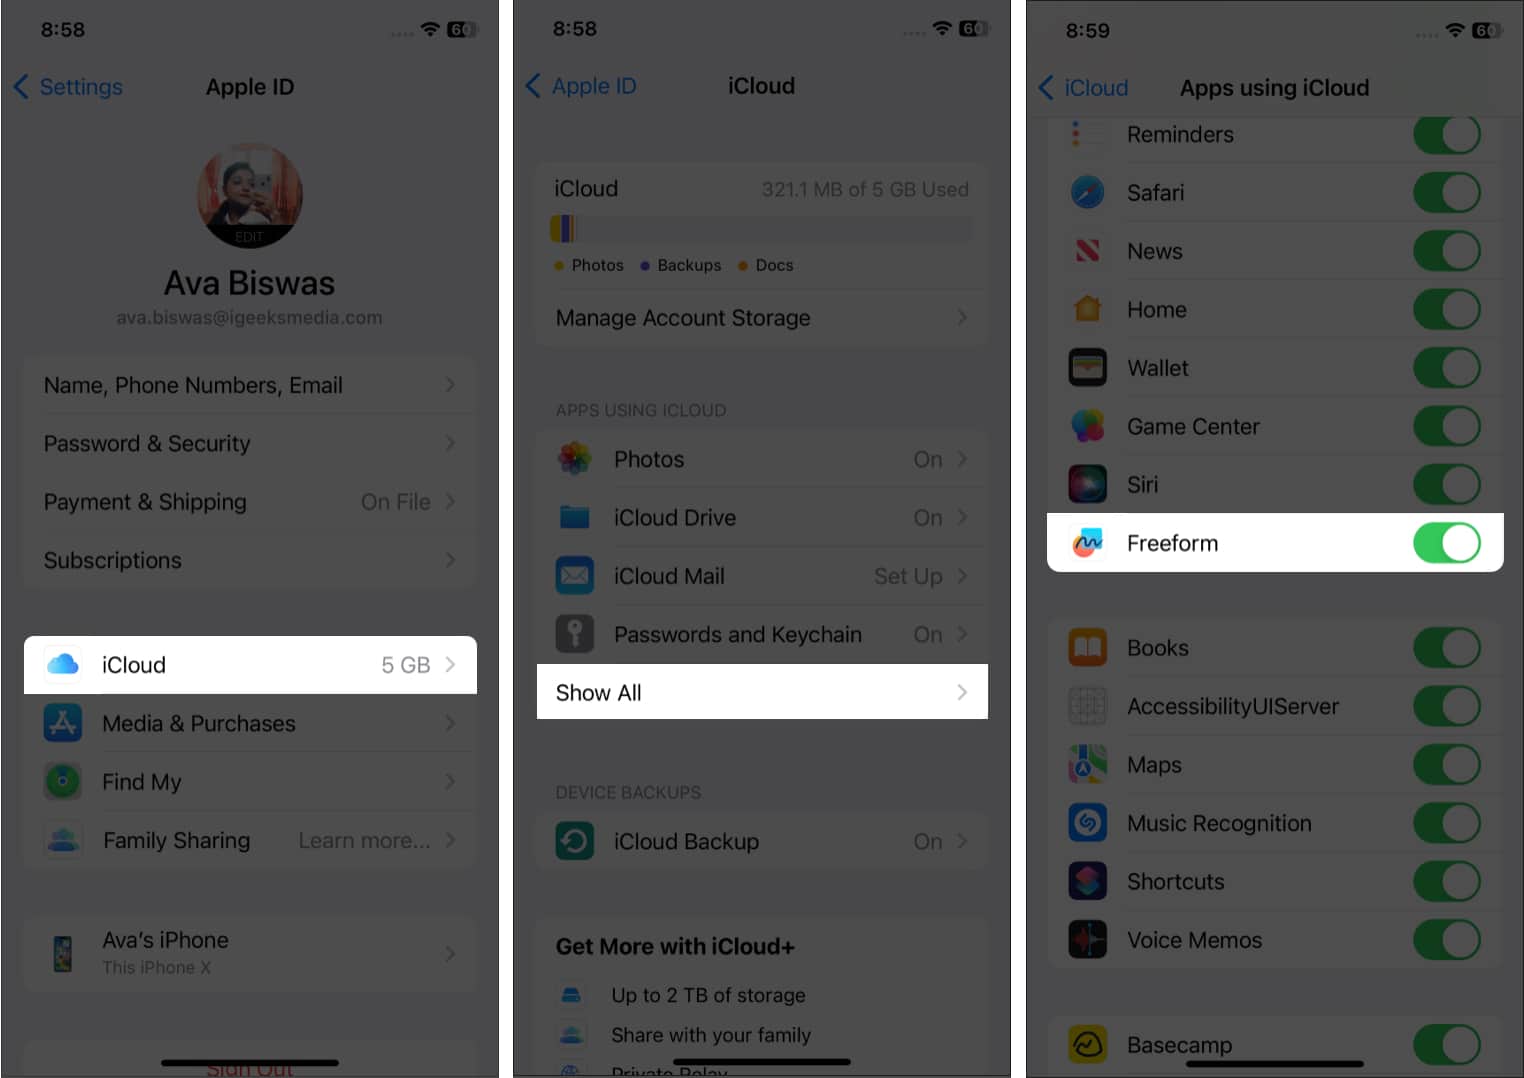 How to enable Freeform in the iCloud Settings